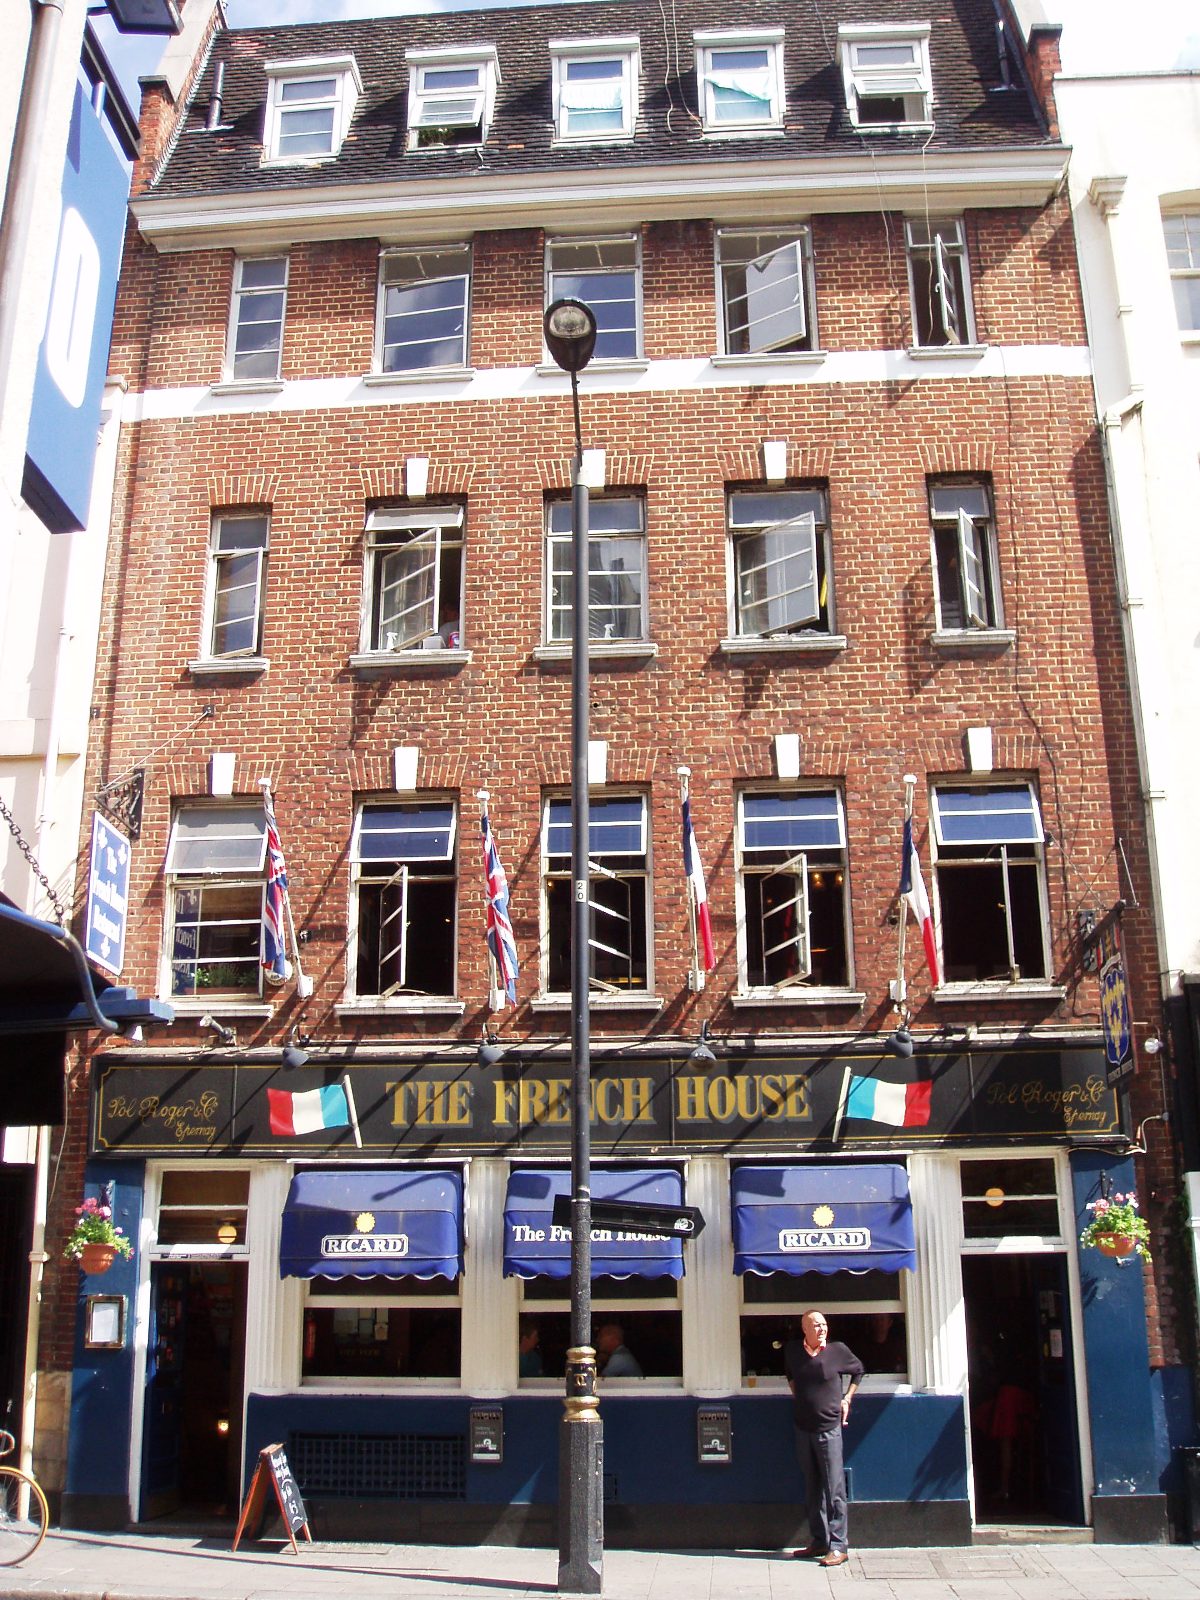 The front of The French House Pub in Soho, London